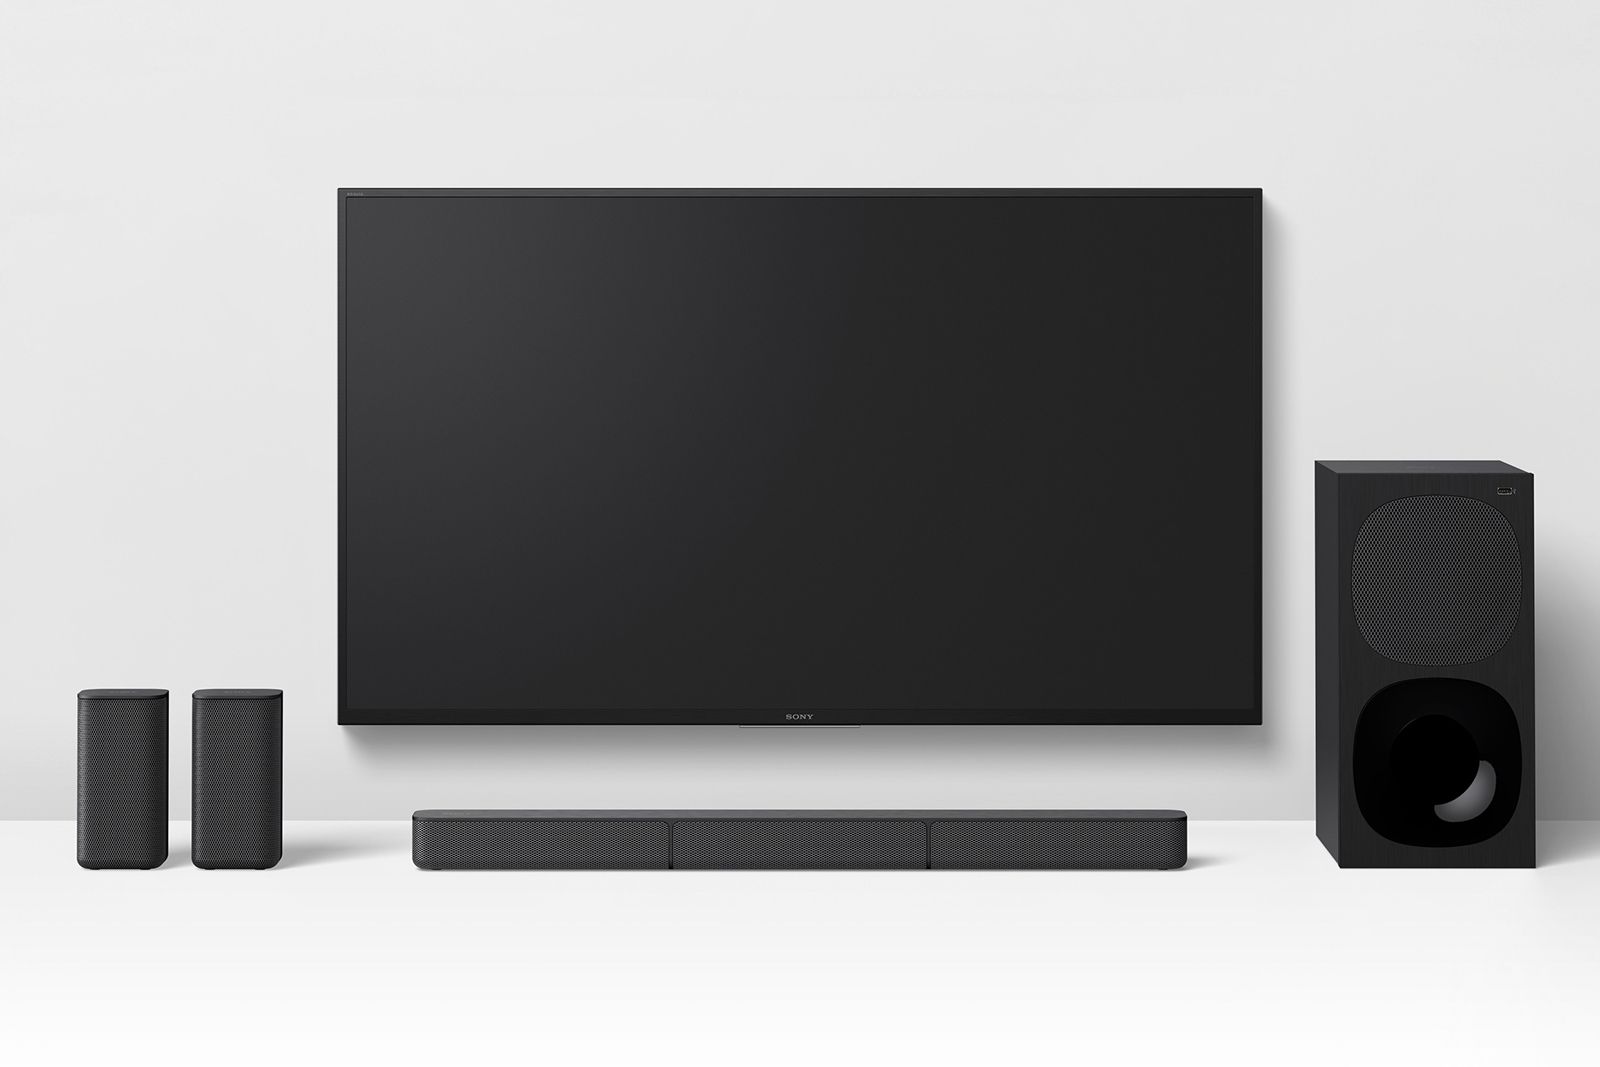 Sony Ht-g700 Dolby Atmos And Ht-s20r Soundbars Inbound With Matching Wireless Subs image 2